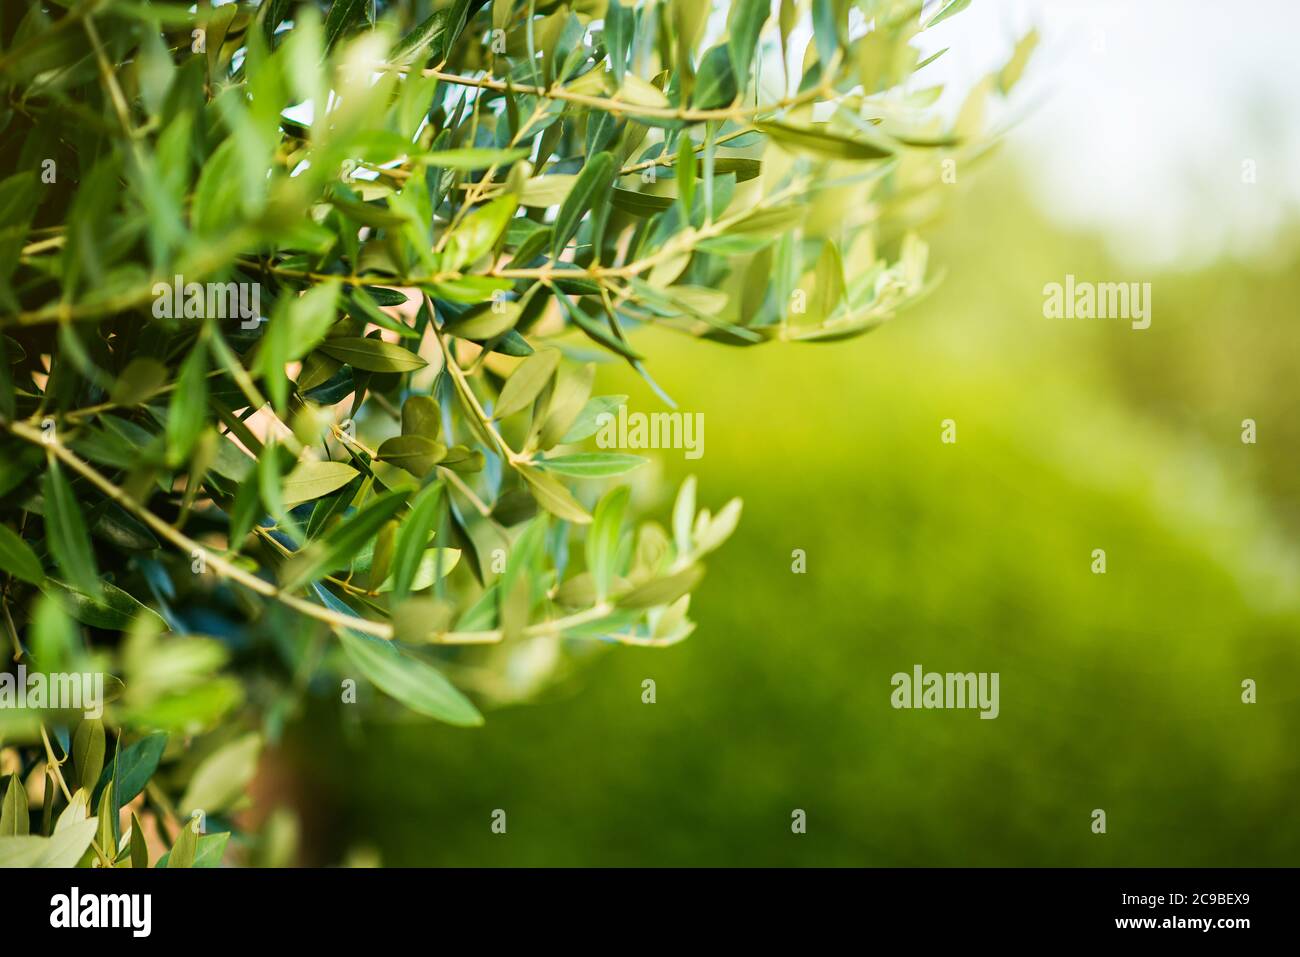 Branch of Olive Tree with Leaves. Agricultural Food Background. Rural Scene. Stock Photo